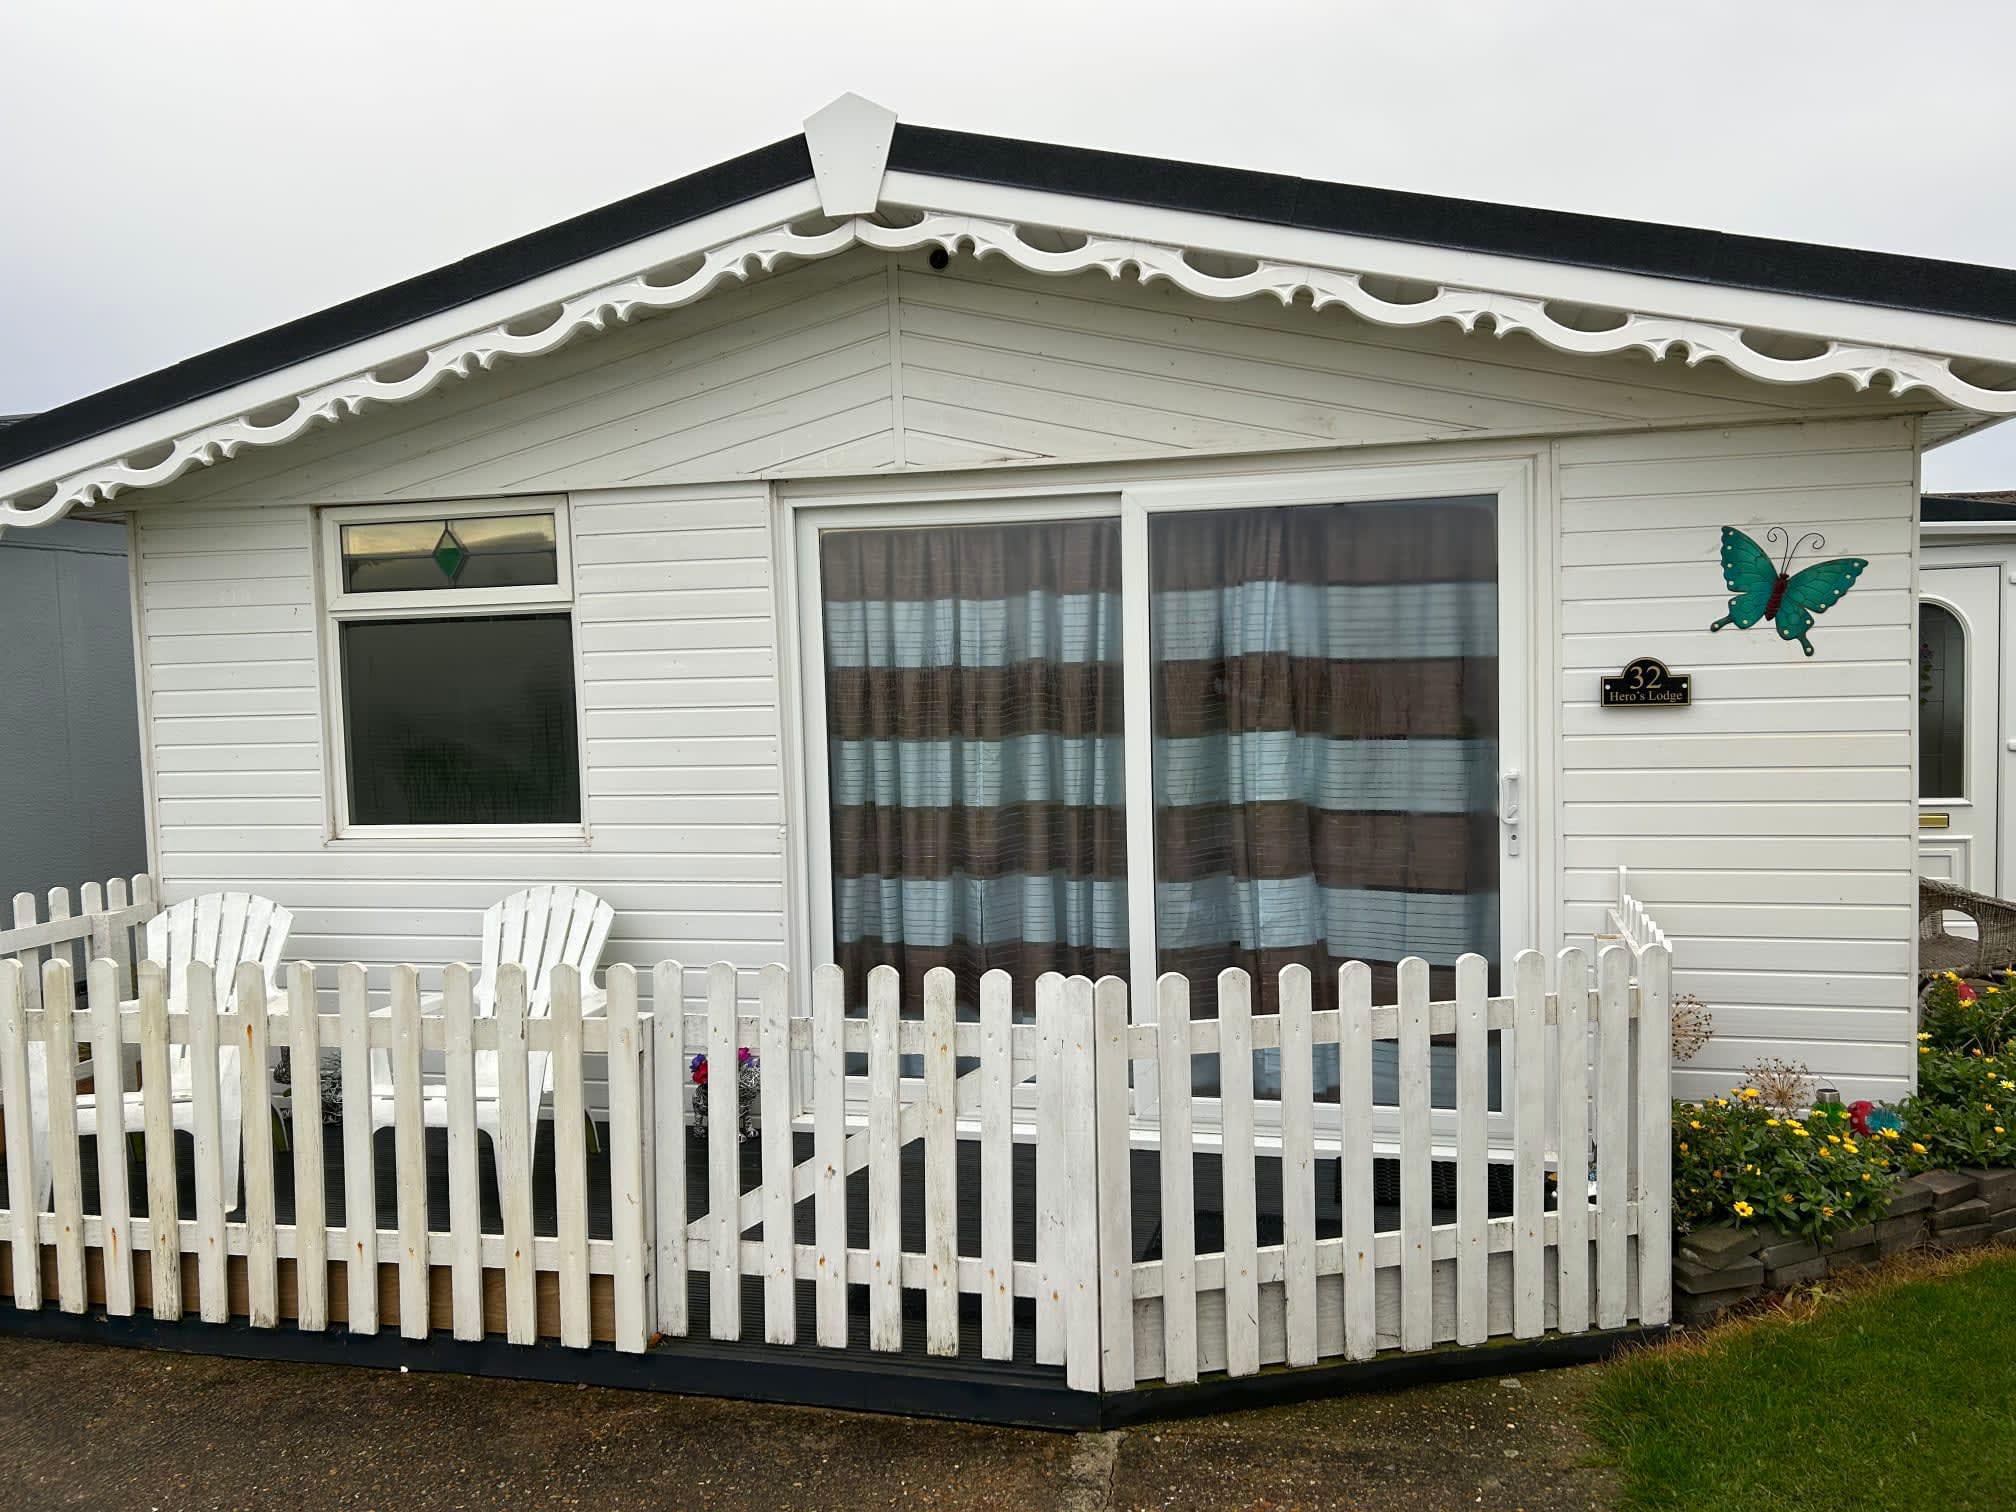 Images Hero's Holiday Homes